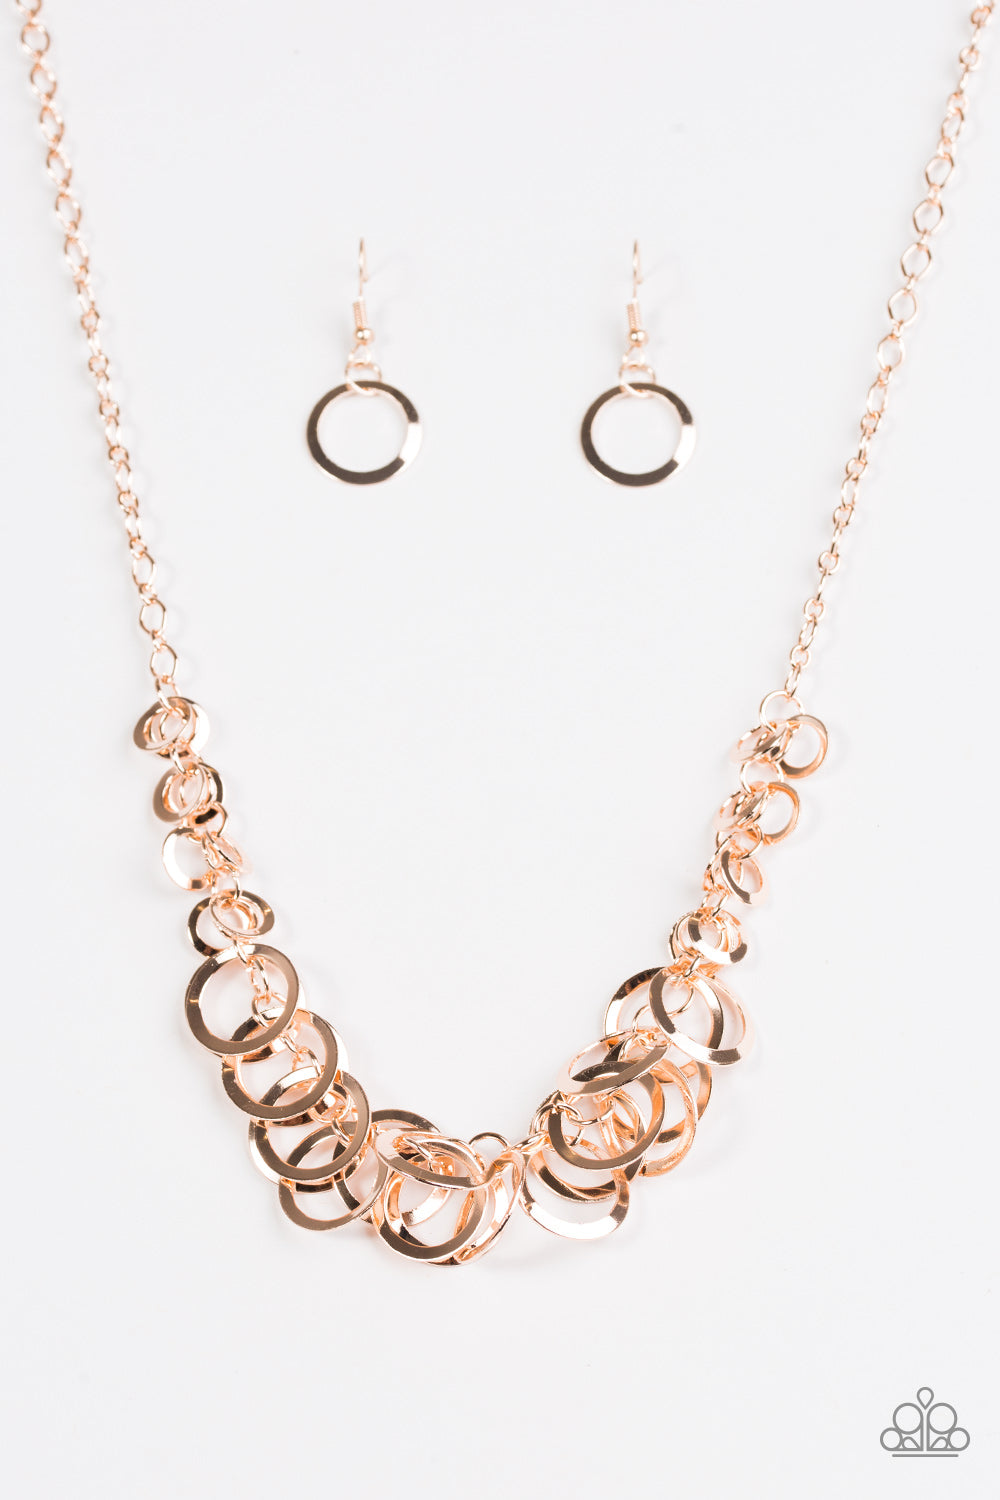 Paparazzi Accessories Royal Circus Rose Gold Necklace - Be Adored Jewelry